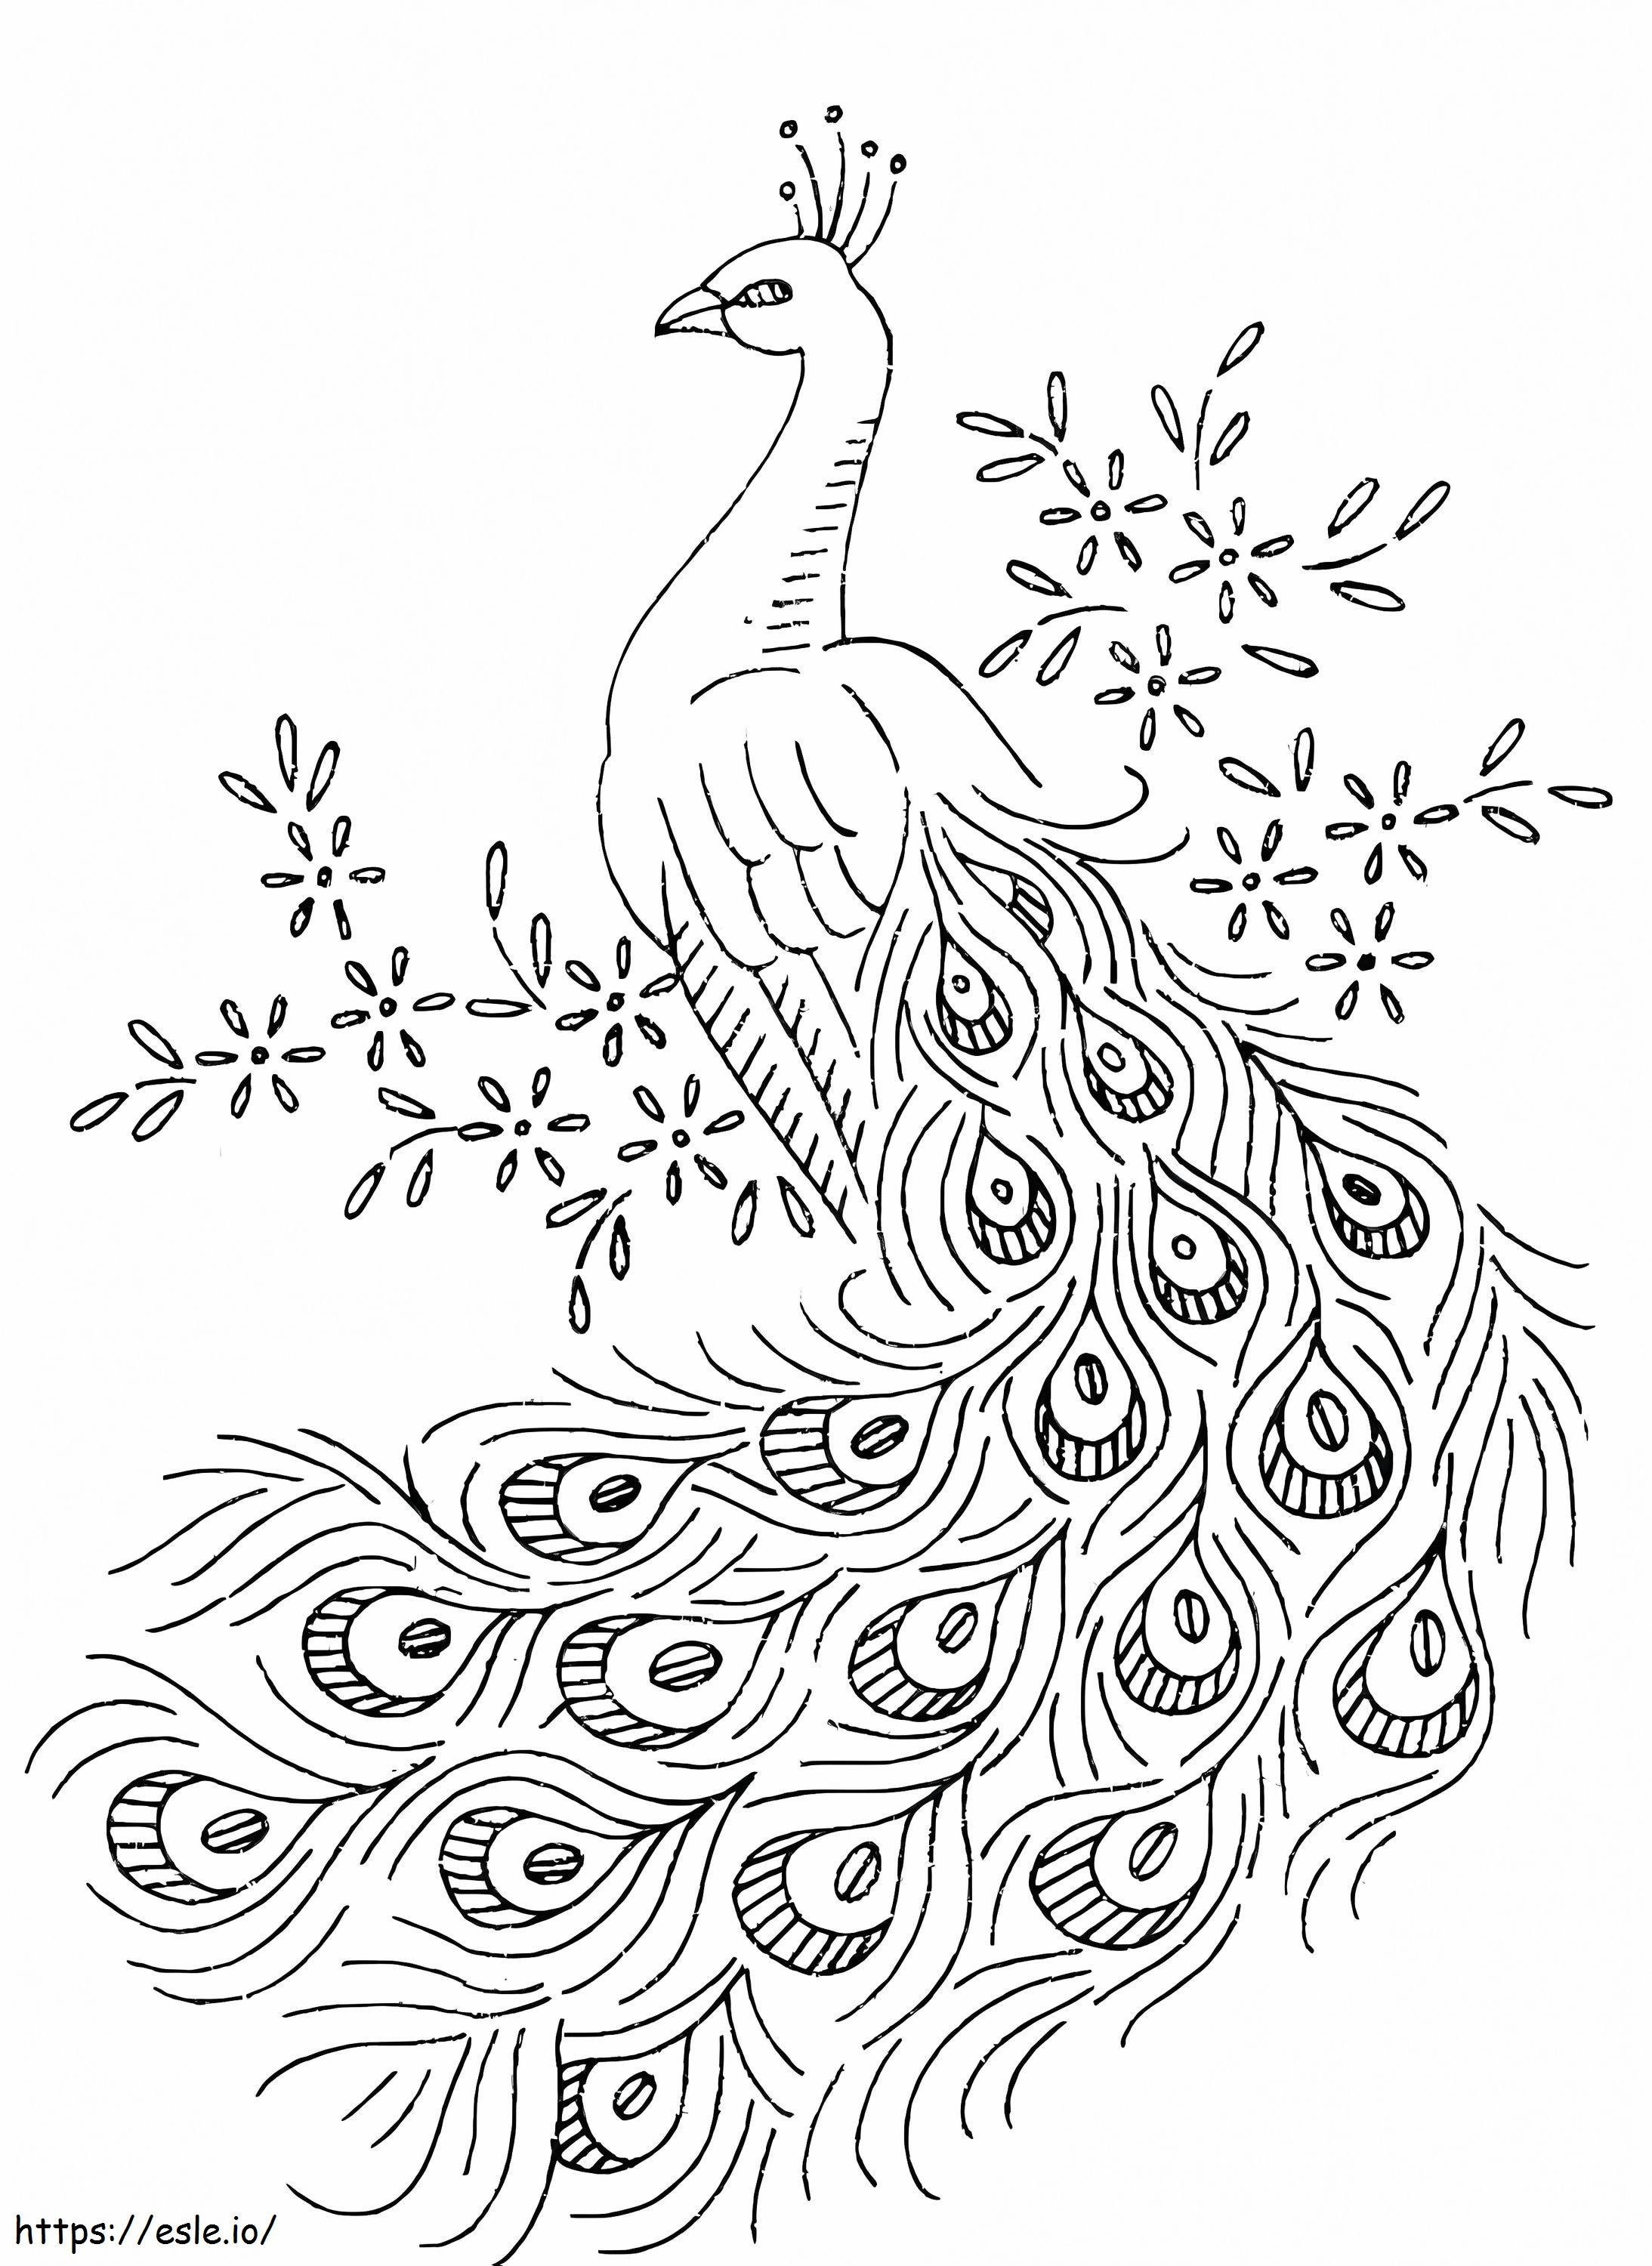 Simple Peacock coloring page